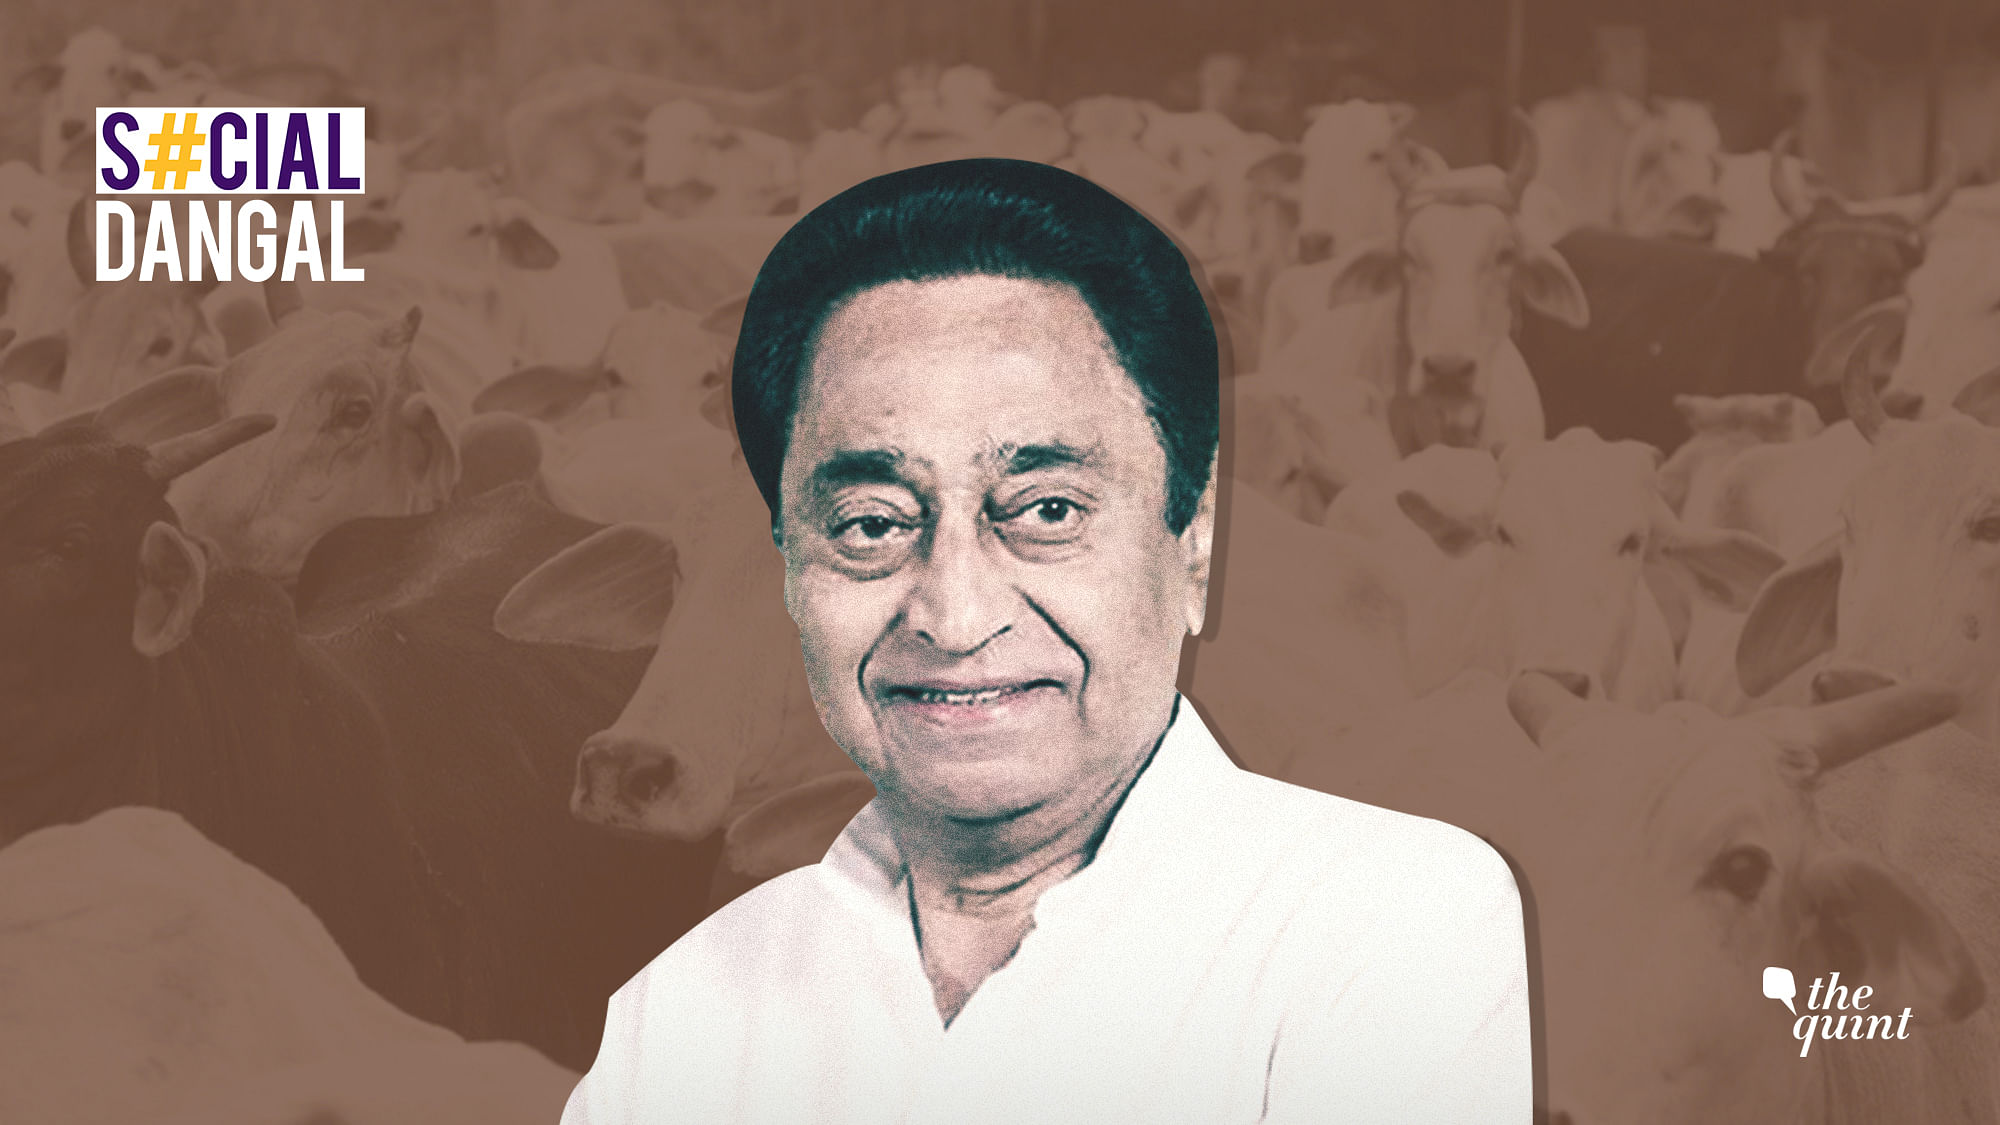 Kamal Nath-led government in MP invoked the National Security Act against three individuals for cow slaughter.